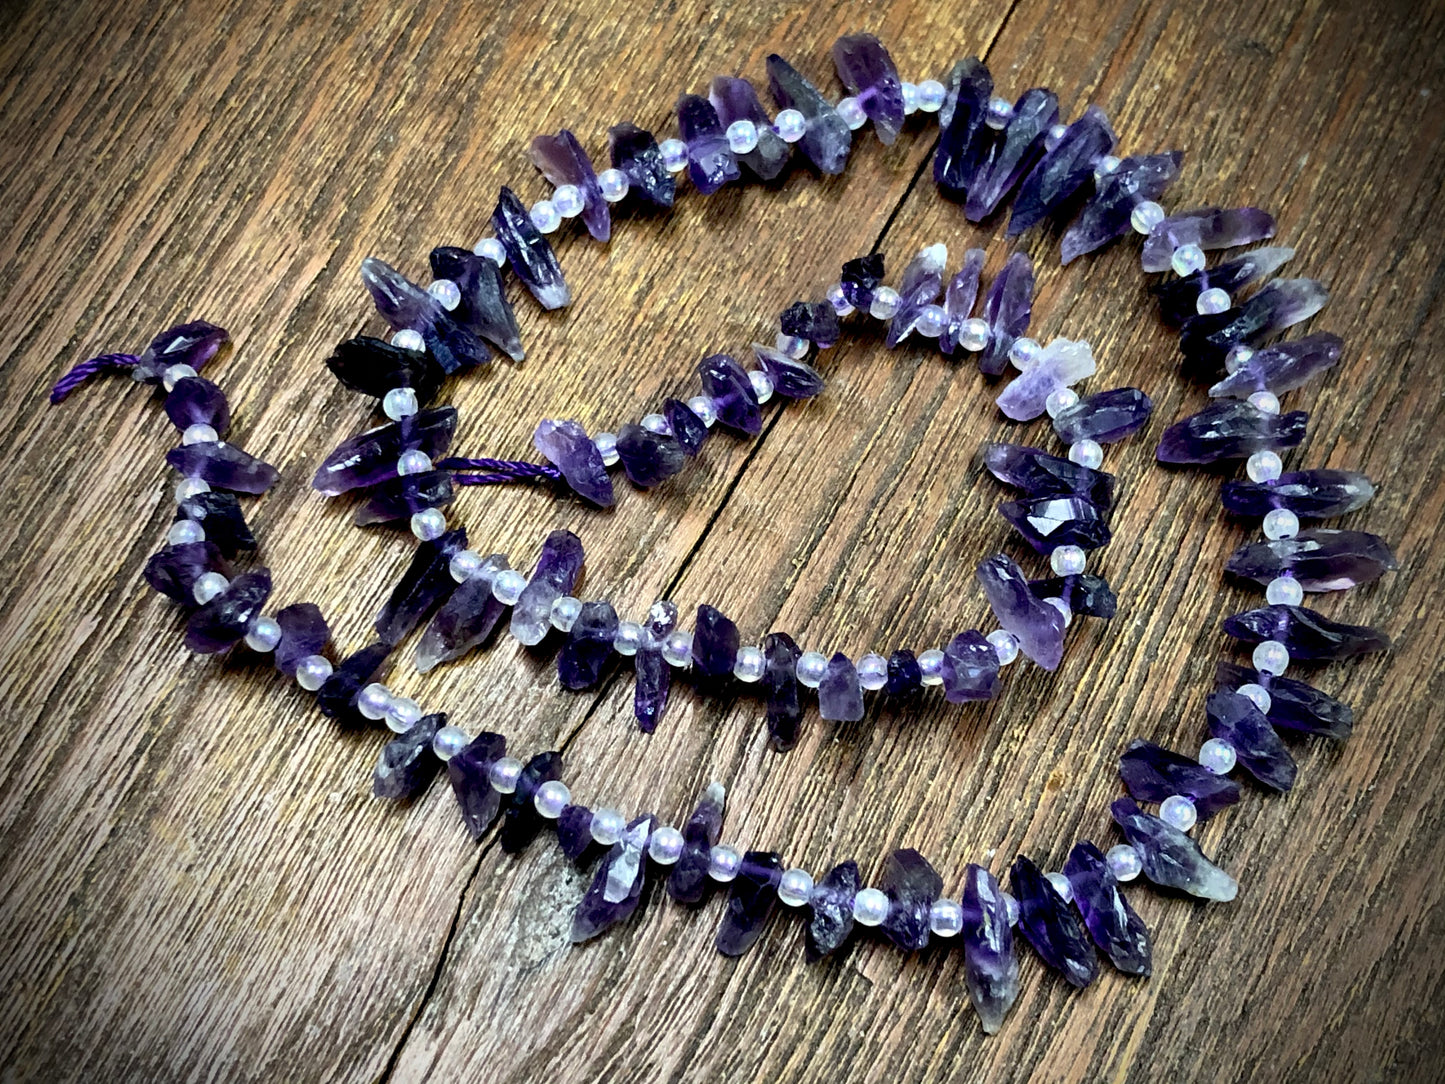 Amethyst 10-20mm Top Drilled Rough Chip Beads